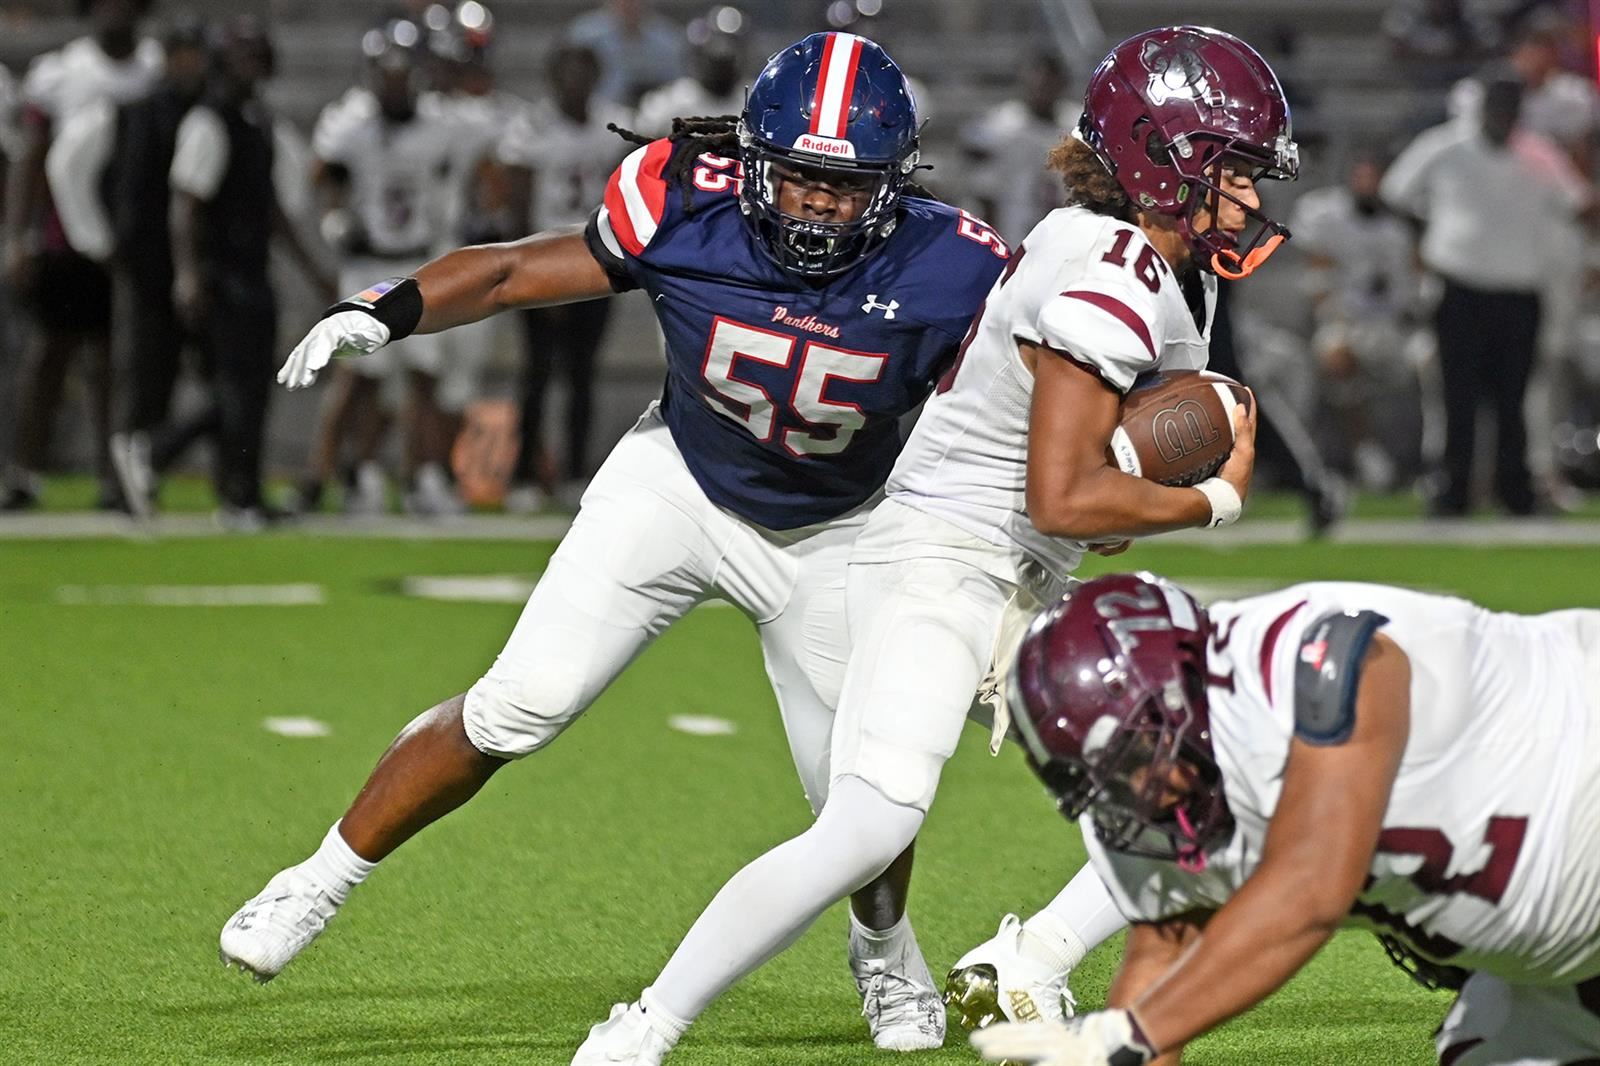 Cypress Springs High School junior defensive lineman Ryan Lynch (No. 55) was voted the District 16-6A co-Defensive MVP.